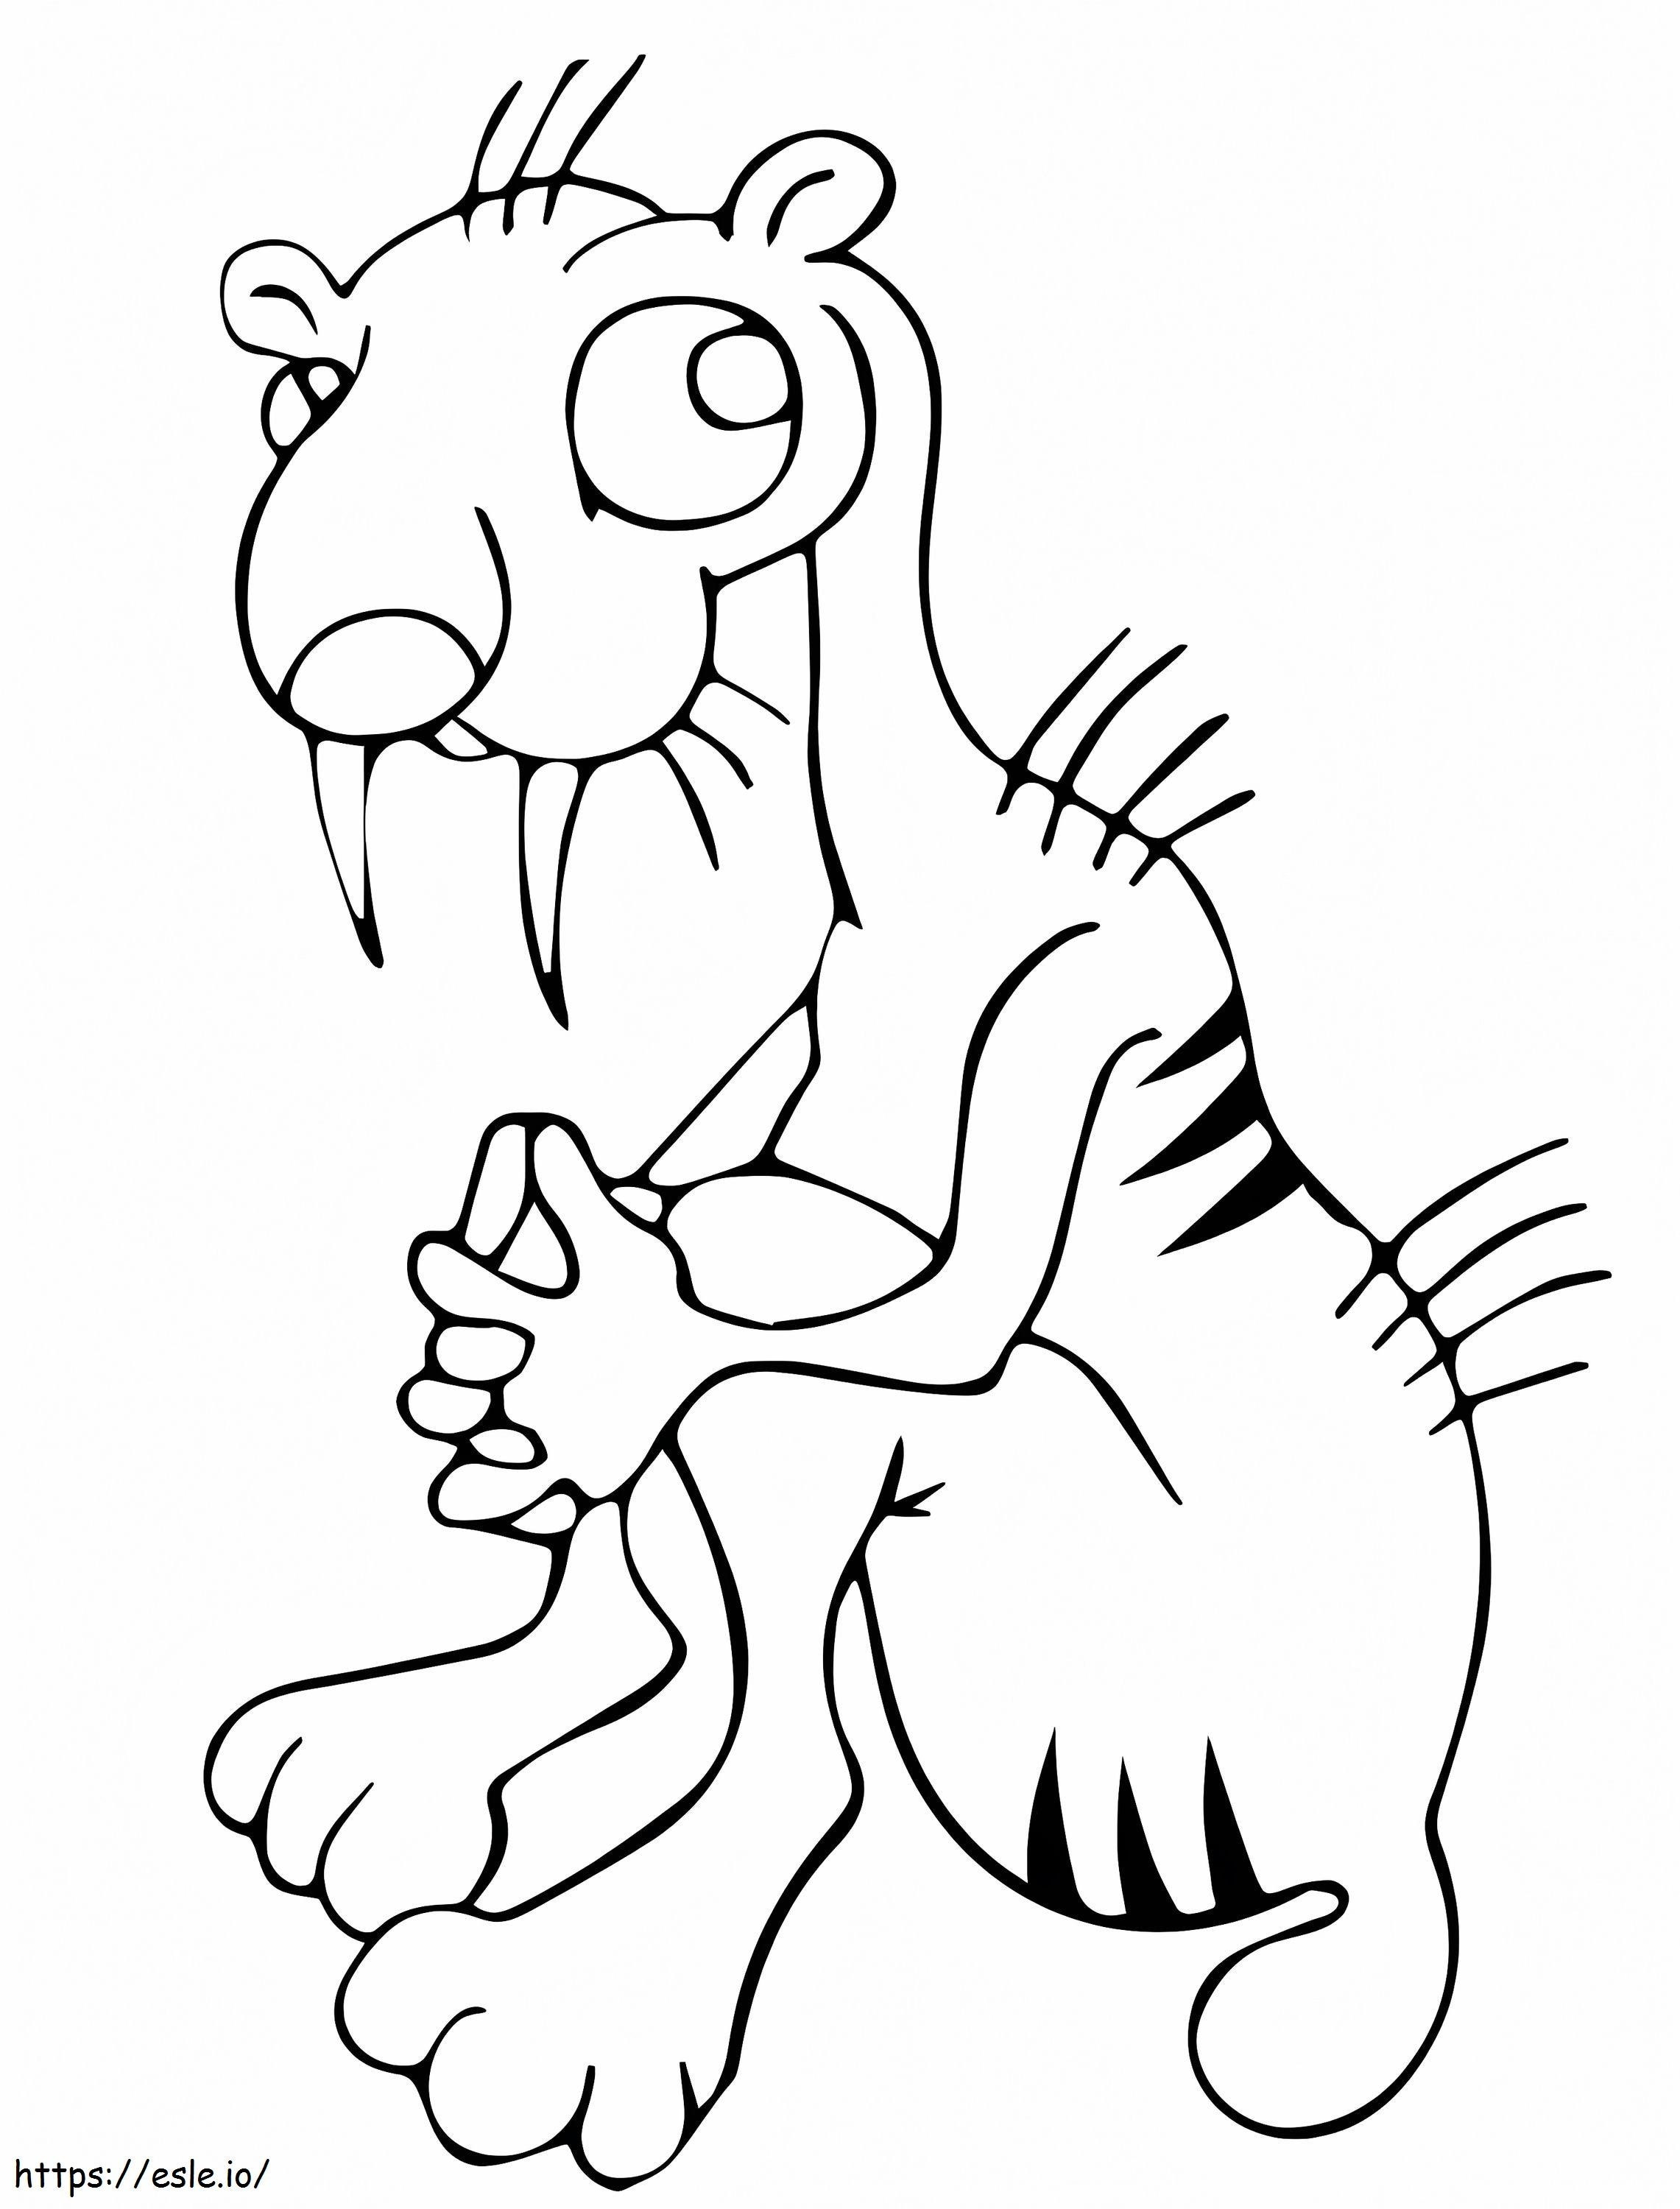 Ugly Saber Tooth Tiger coloring page